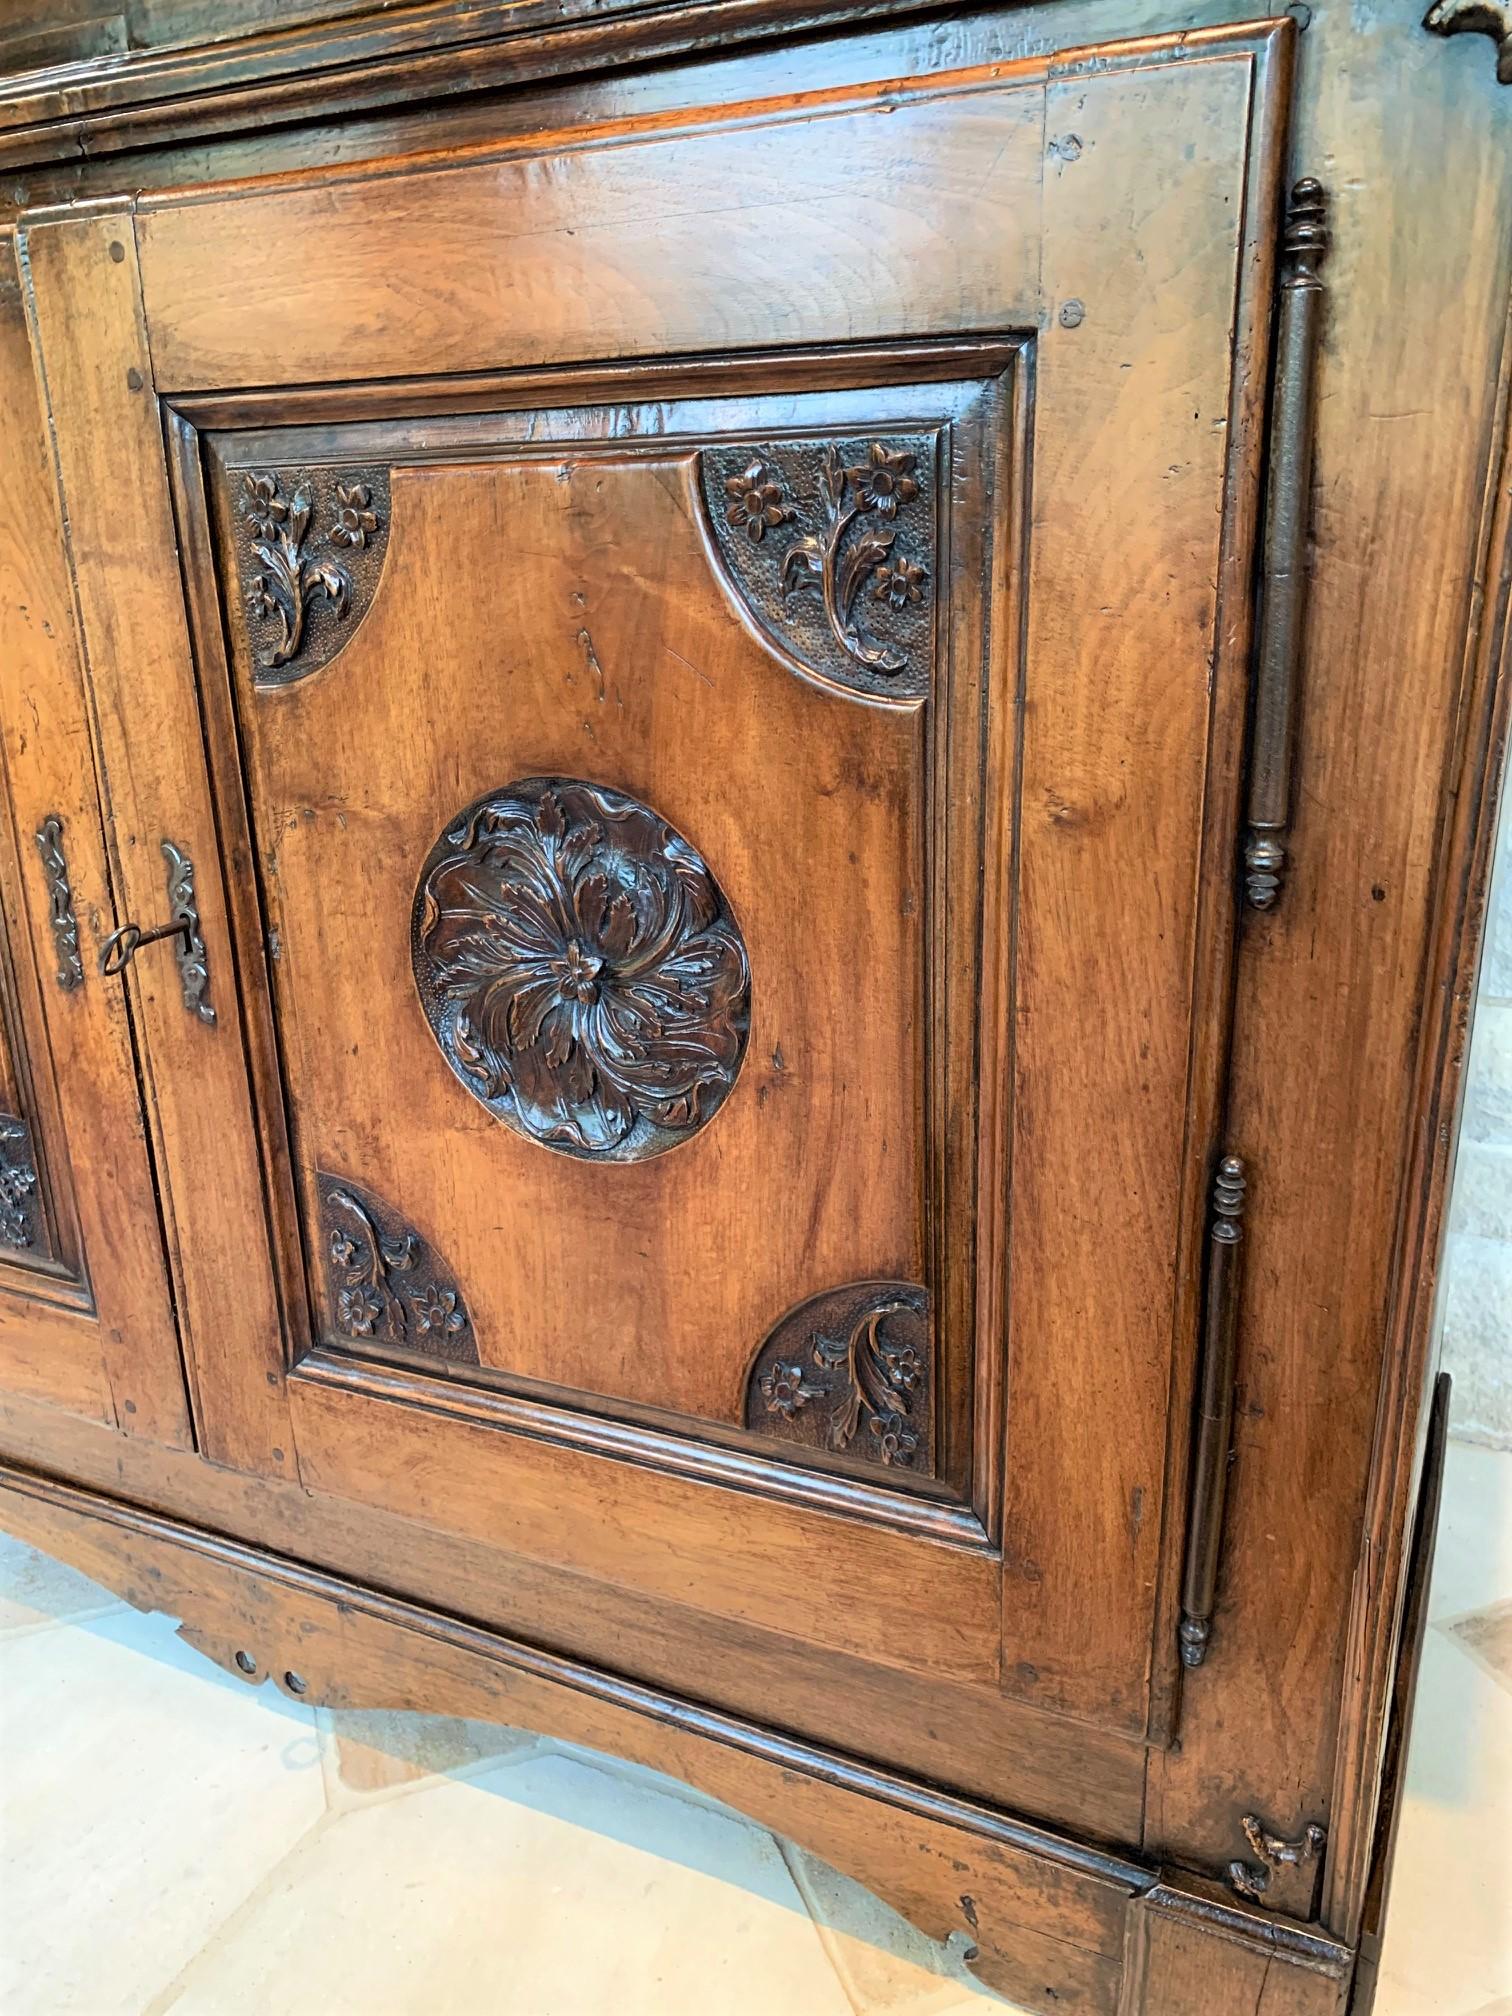 Very fine 18th century French red walnut cabinet or armoire with a rich honey-colored patina. The cupboard doors feature recessed foliate carvings accented by carved floral sprays at the corners. Retains the original handwrought iron hinges and